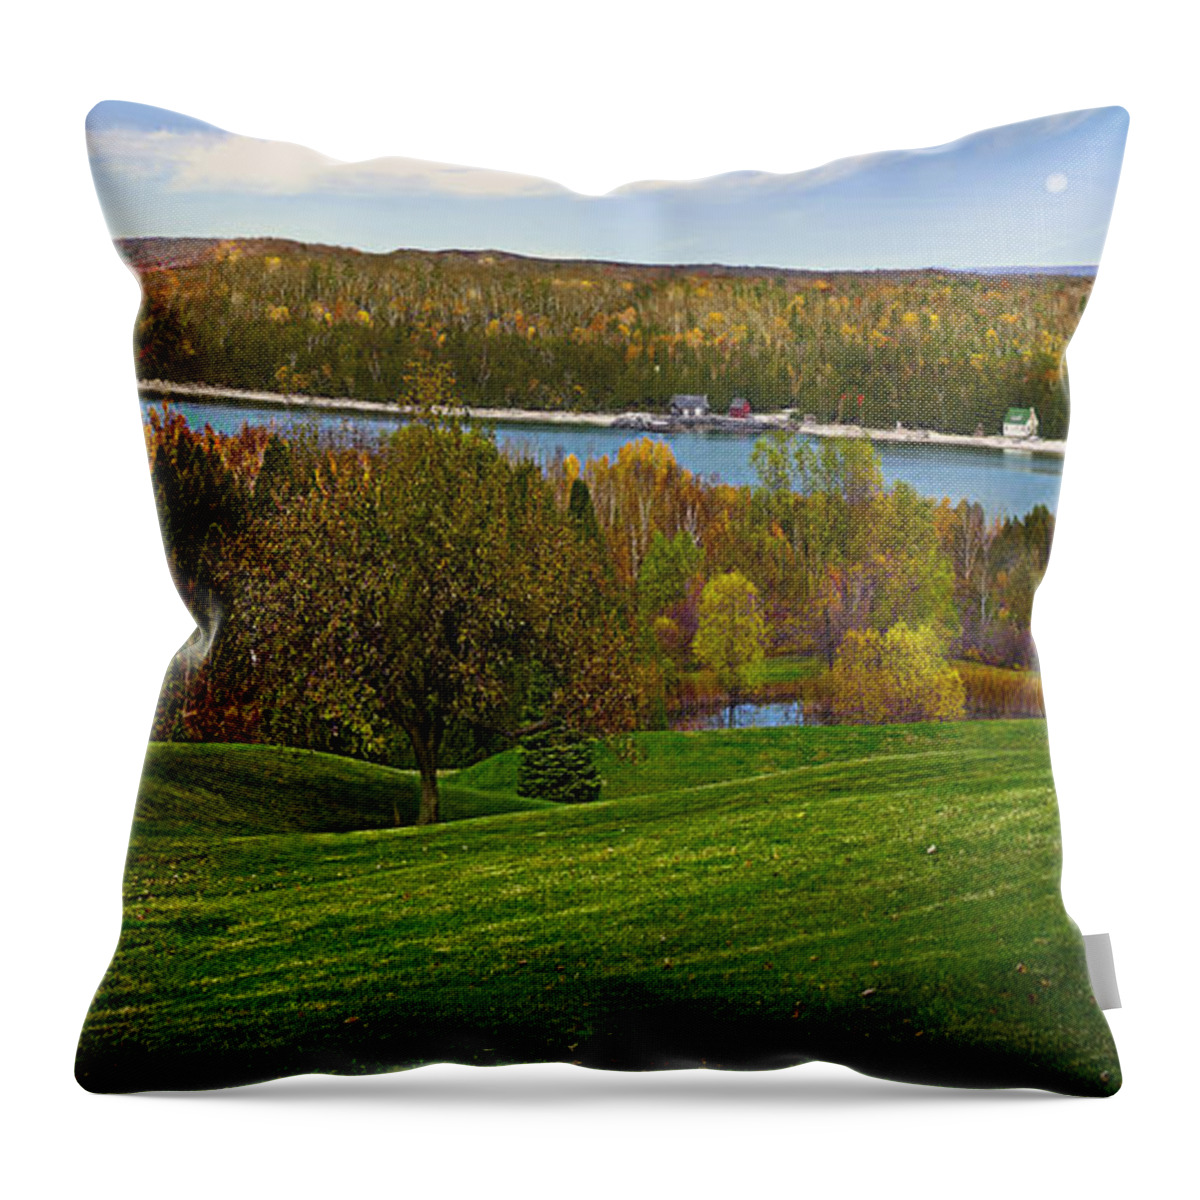 Grand View Scenic Overlook By Doug Kreuger Throw Pillow featuring the painting Grand View Scenic Overlook by Doug Kreuger